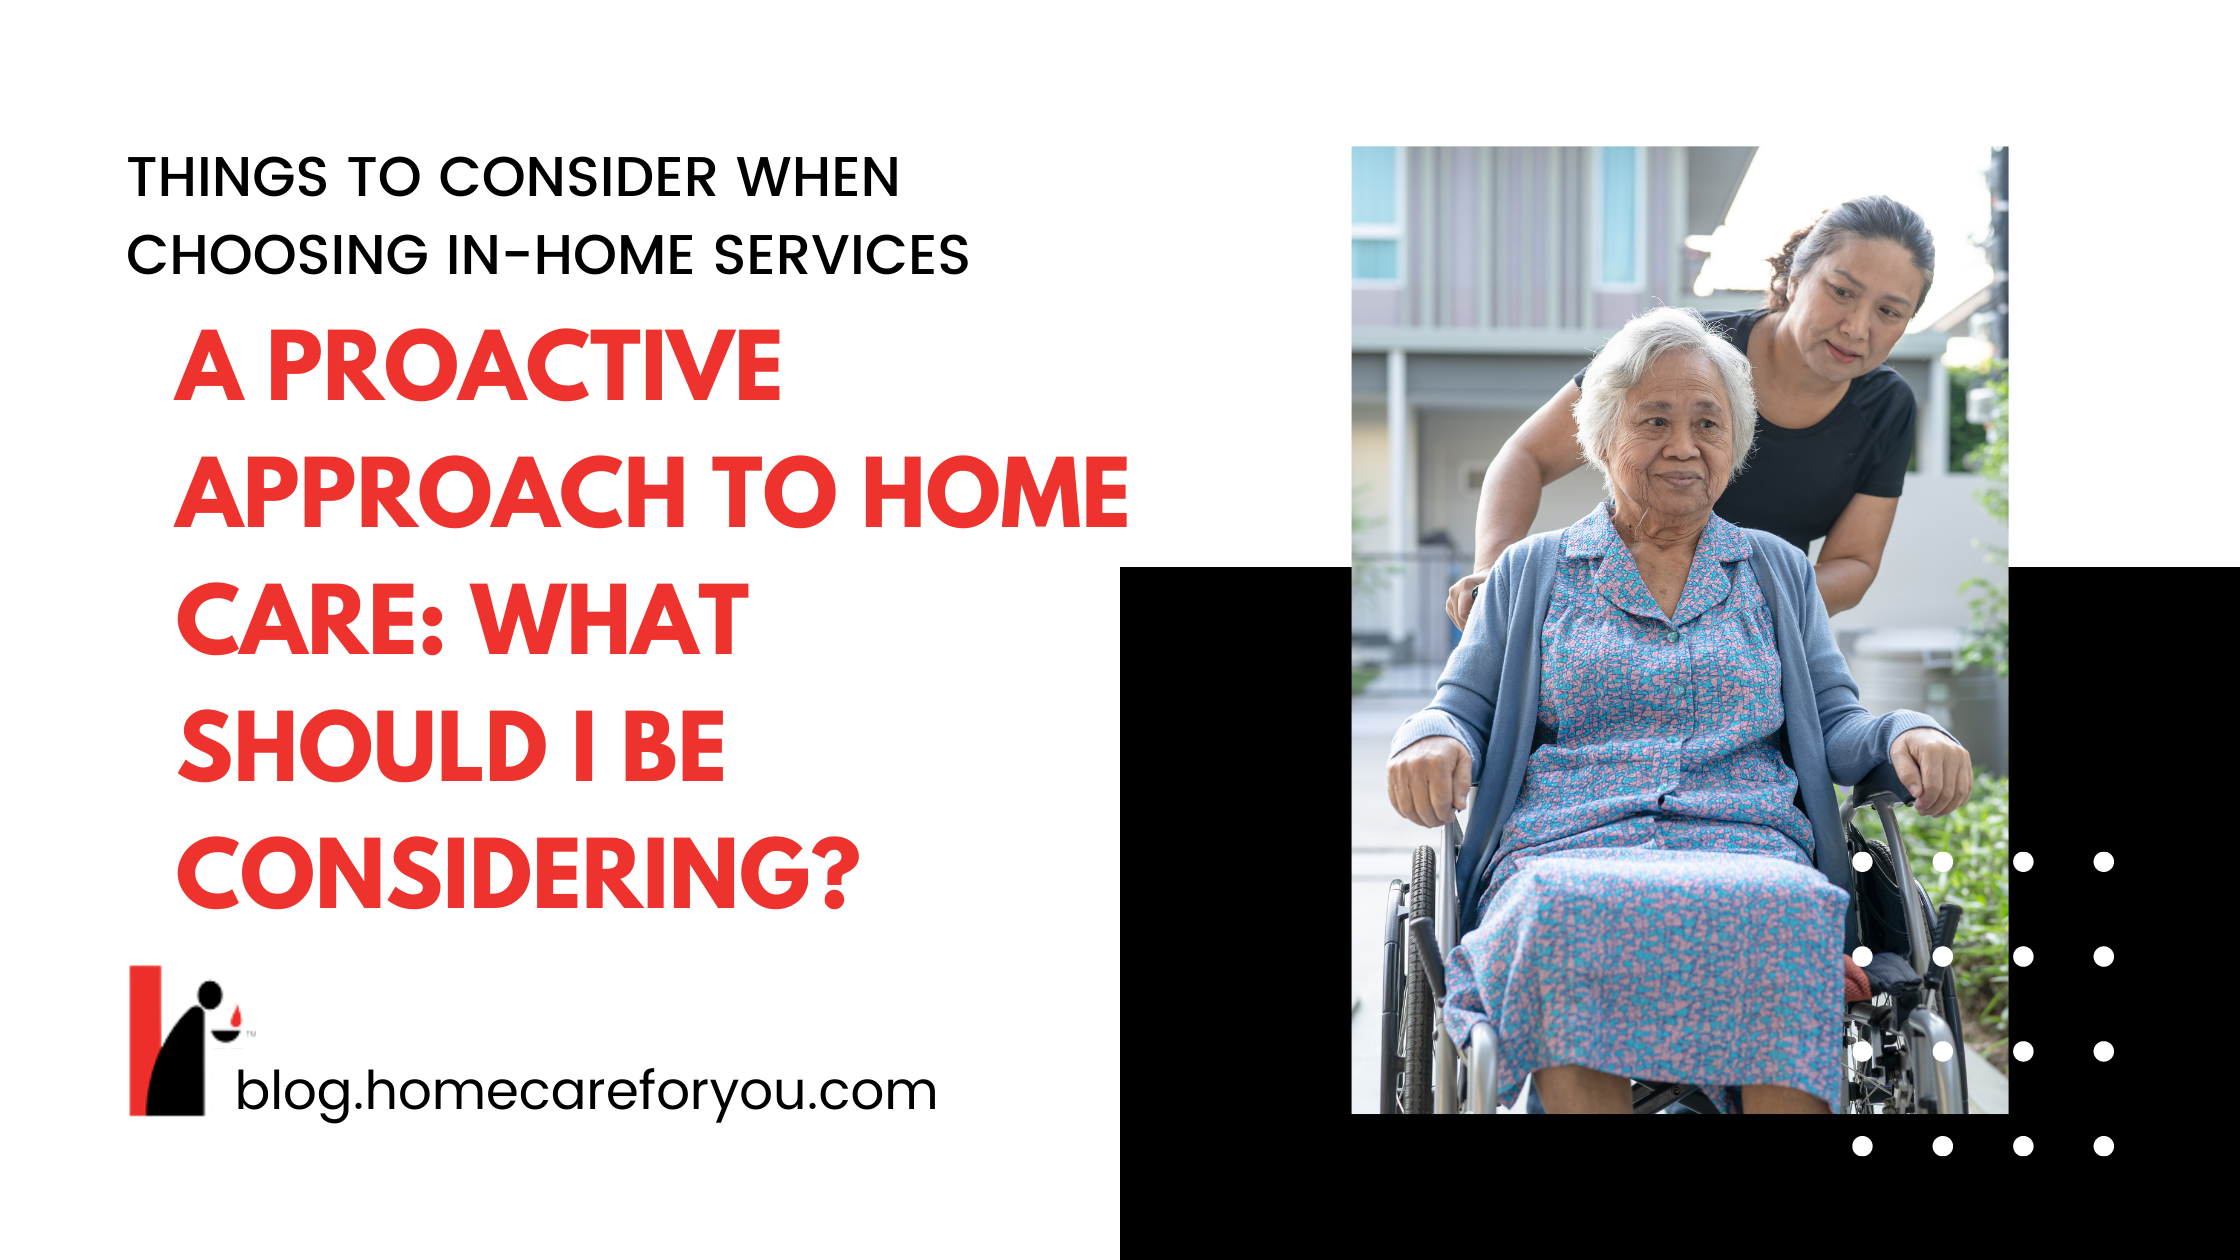 A Proactive Approach to Home Care: What Should I Be Considering?